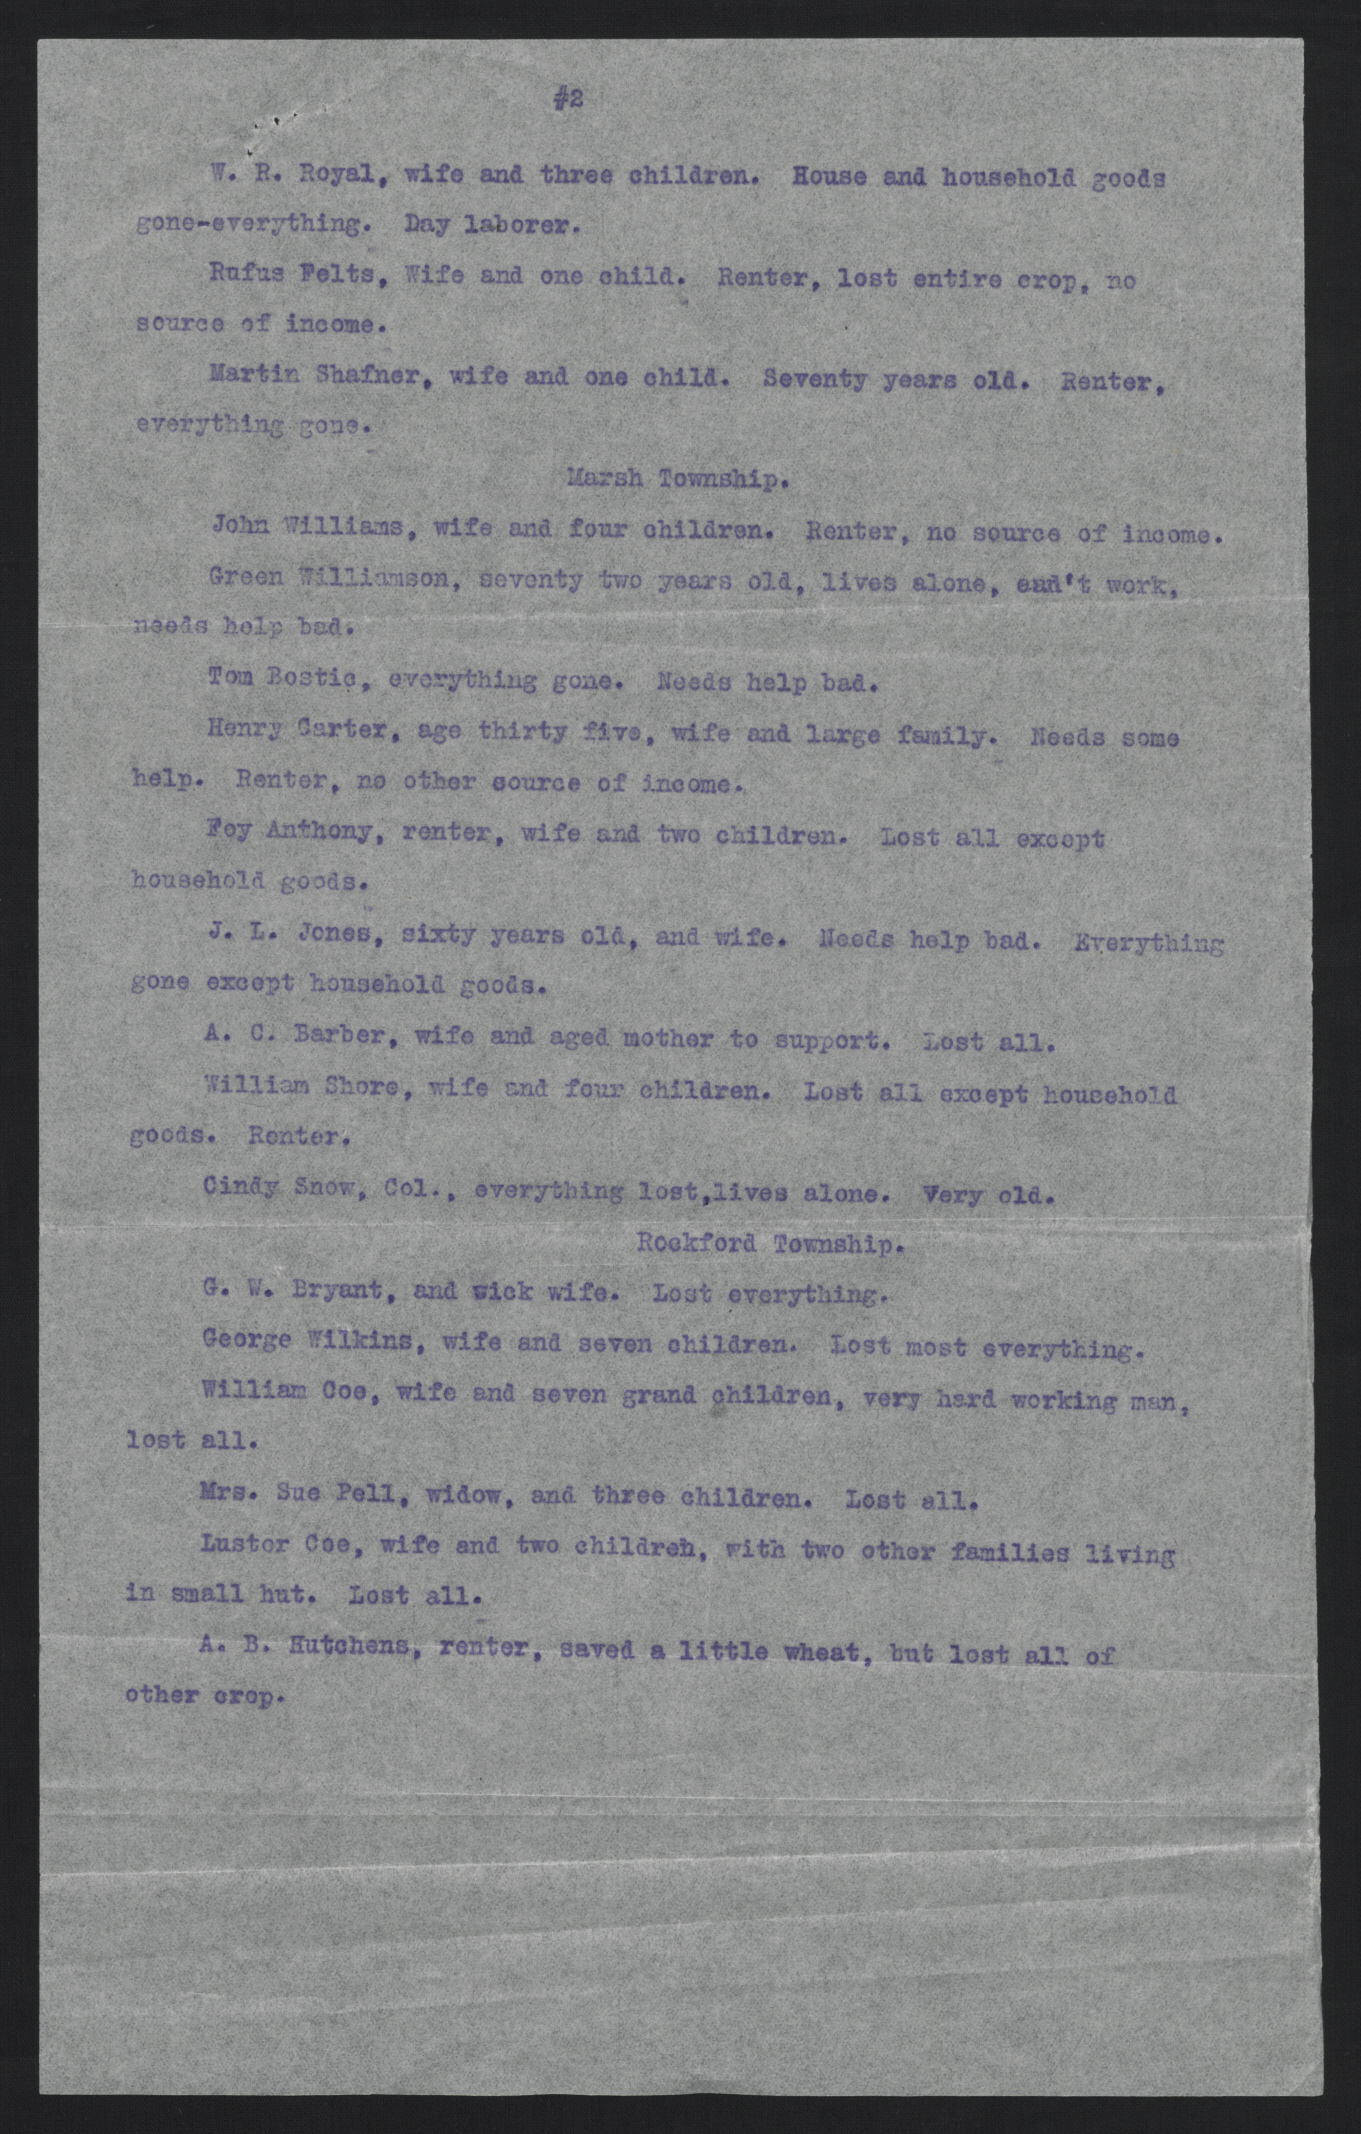 List of Residents in Surry County Impacted by the 1916 Flood, circa August 1916, page 2